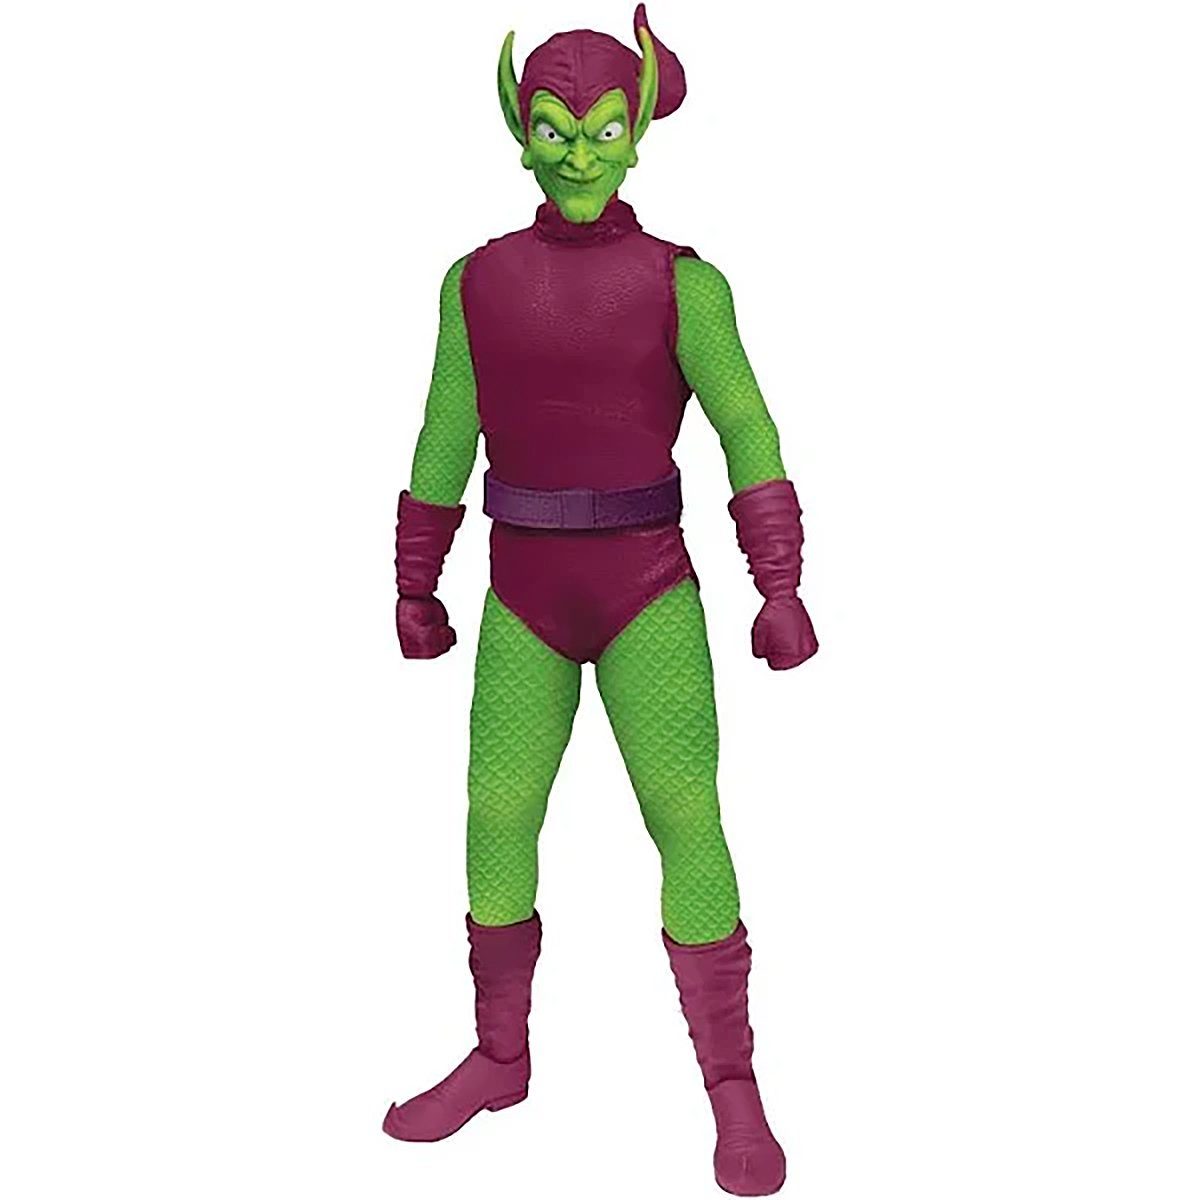 MARVEL Actionfigur Marvel Green Goblin Action figur One:12 Deluxe Edition